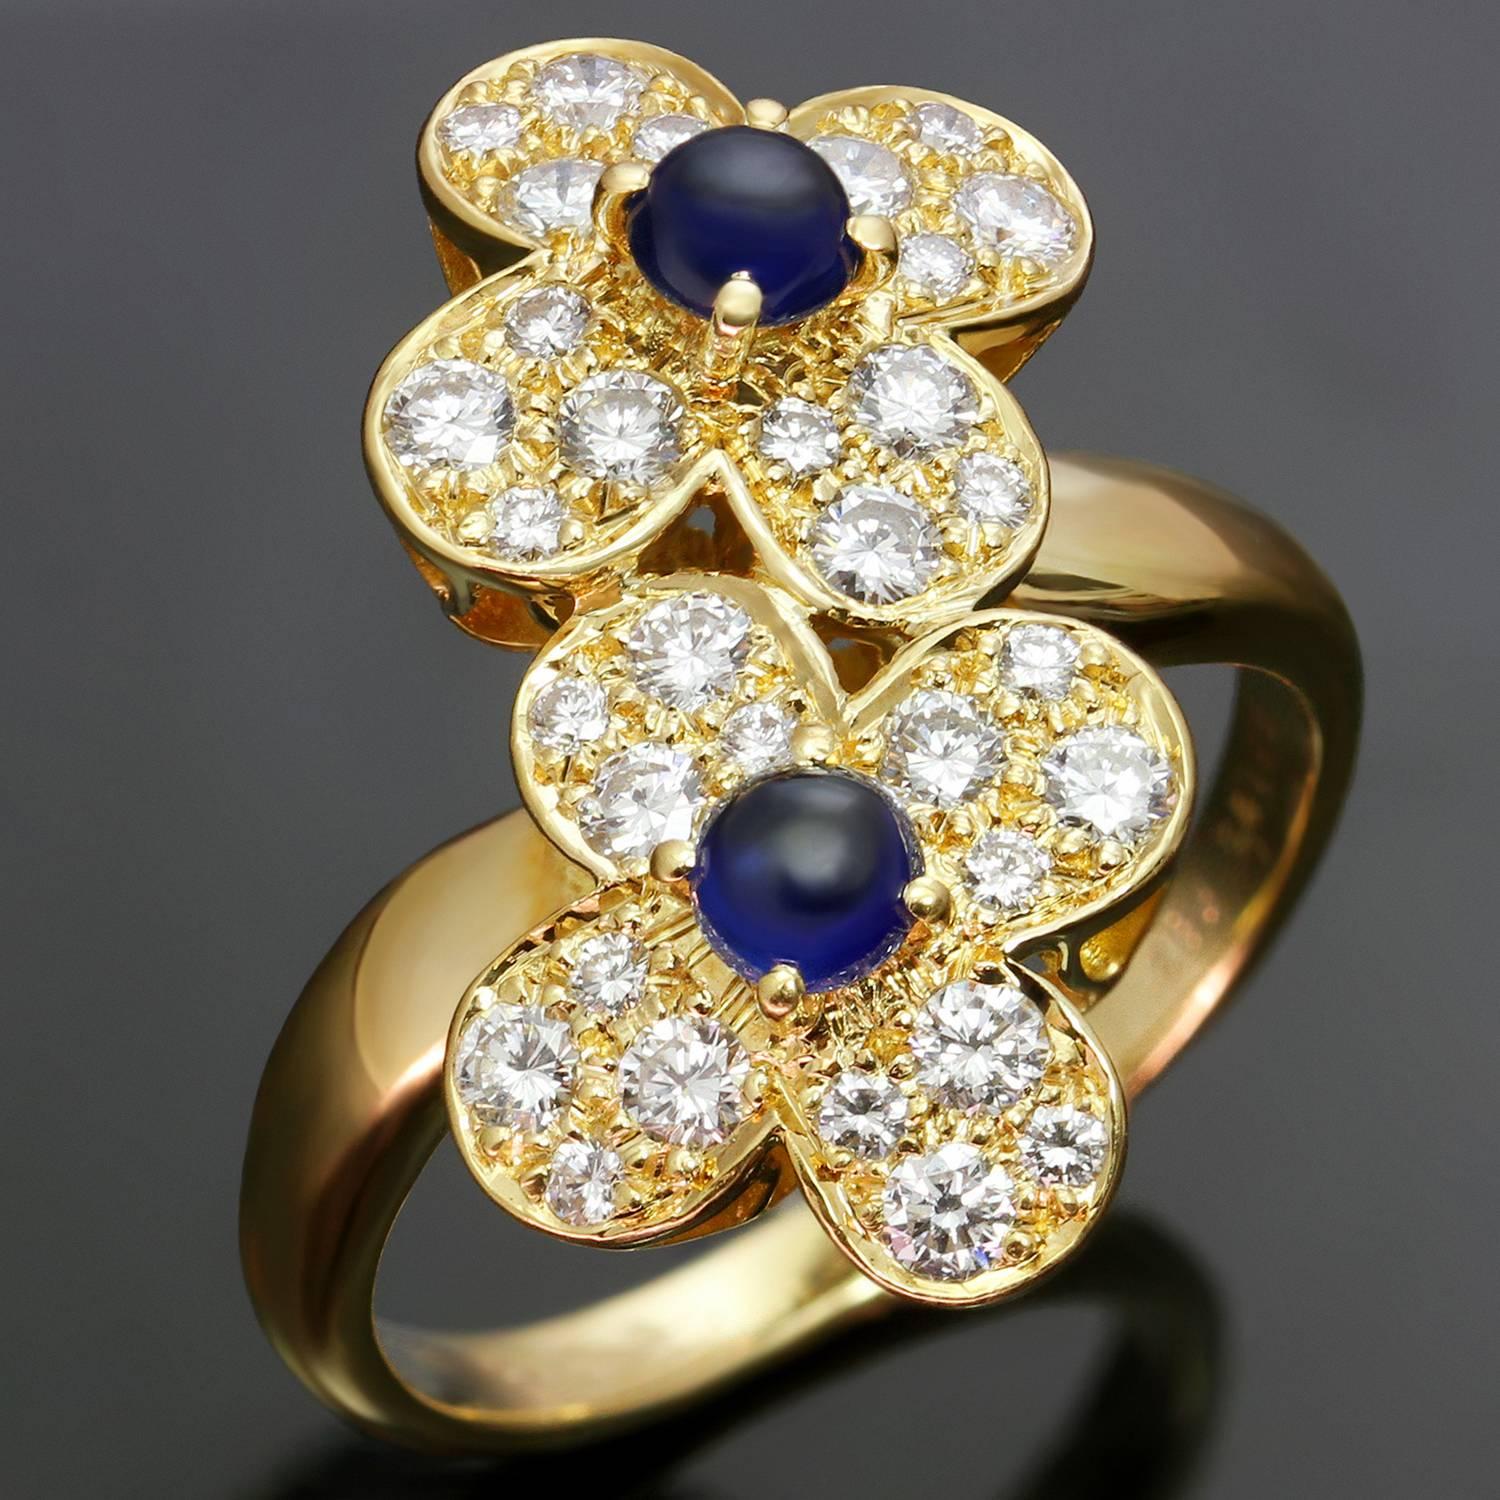 This stunning Van Cleefs & Arpels ring from the classic Trefle collection is crafted in 18k yellow gold and features a double clover flower motif set with round cabochon sapphire of an estimated 0.65 carats and brilliant-cut round diamonds of 0.80